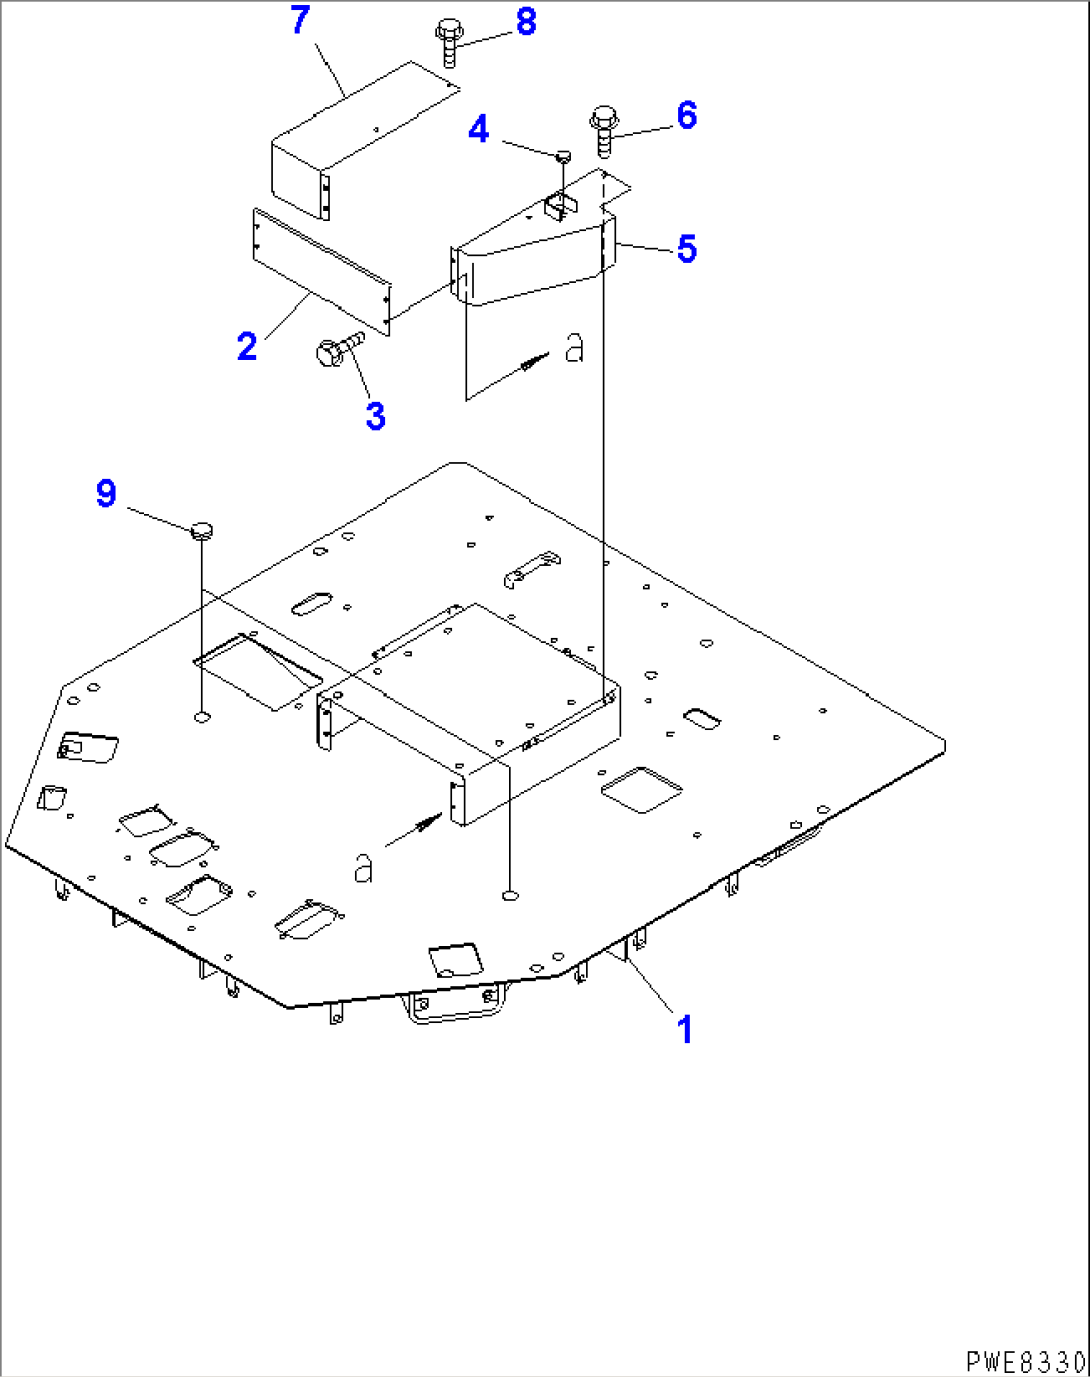 FLOOR (FLOOR FRAME) (WITH JOY STICK STEERING) (WITH AUTO GREASE)(#50001-51000)